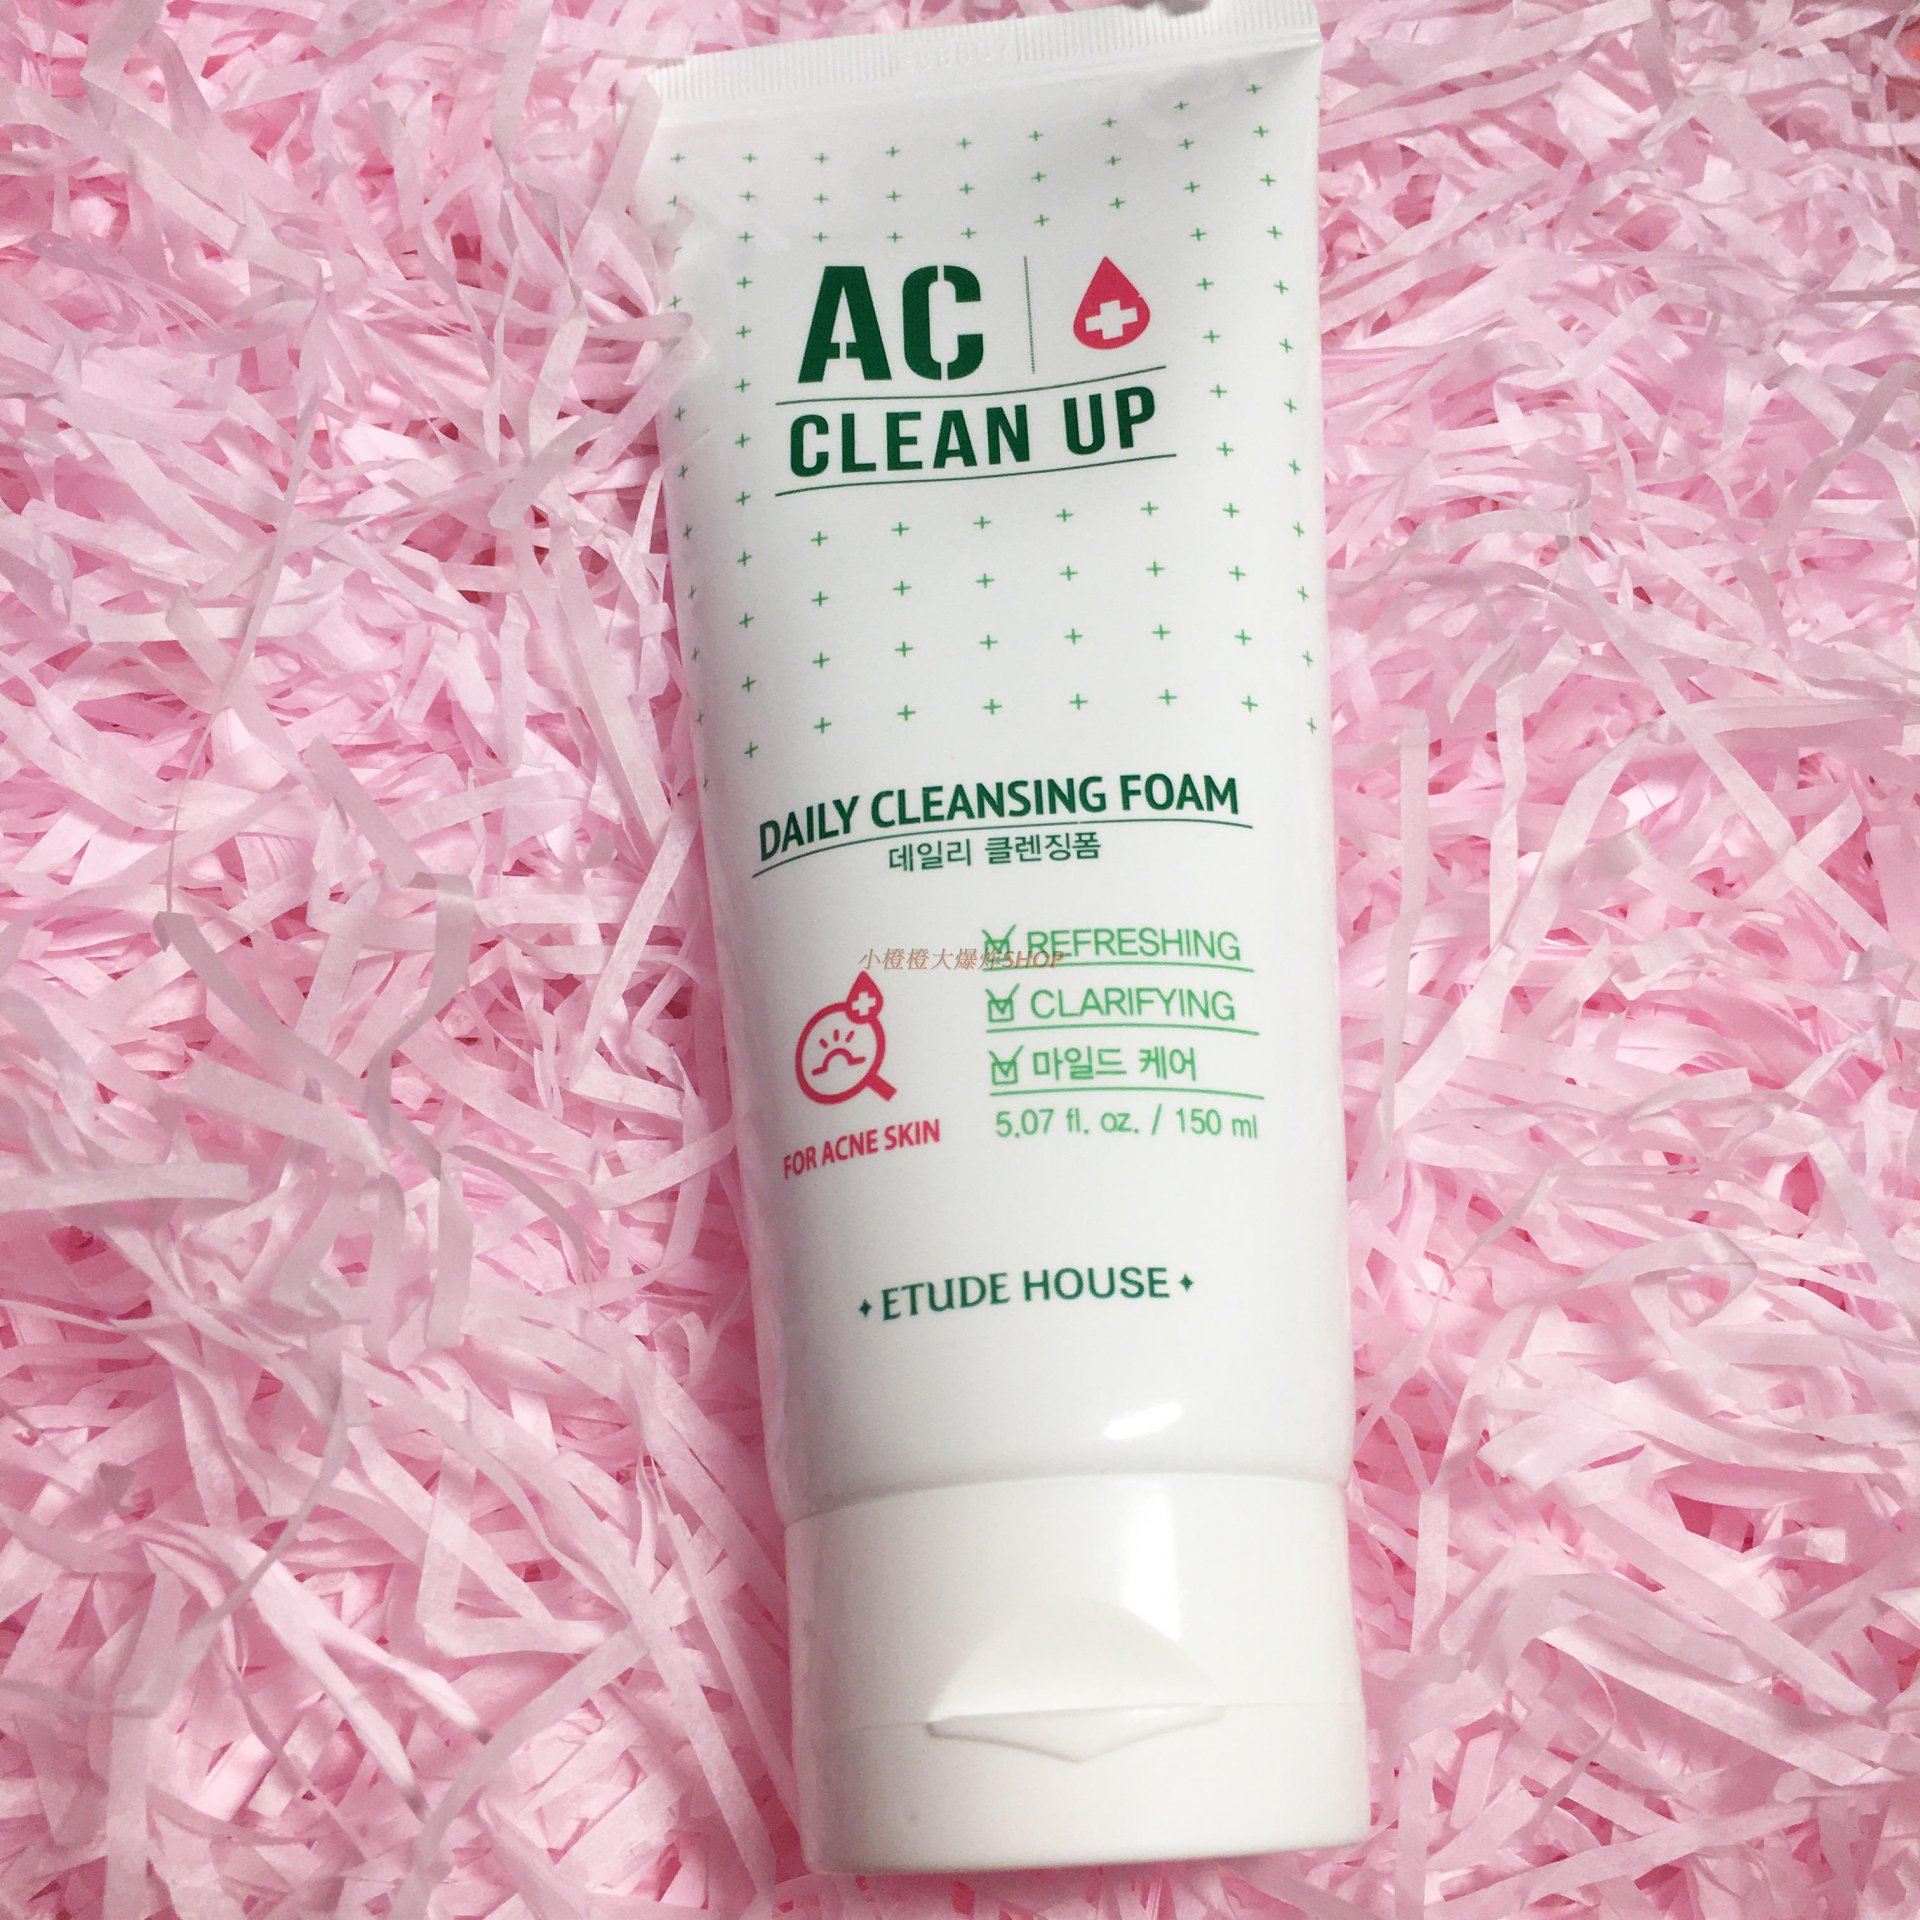 Etude House AC Clean Up Daily Cleansing Foam 150ml.